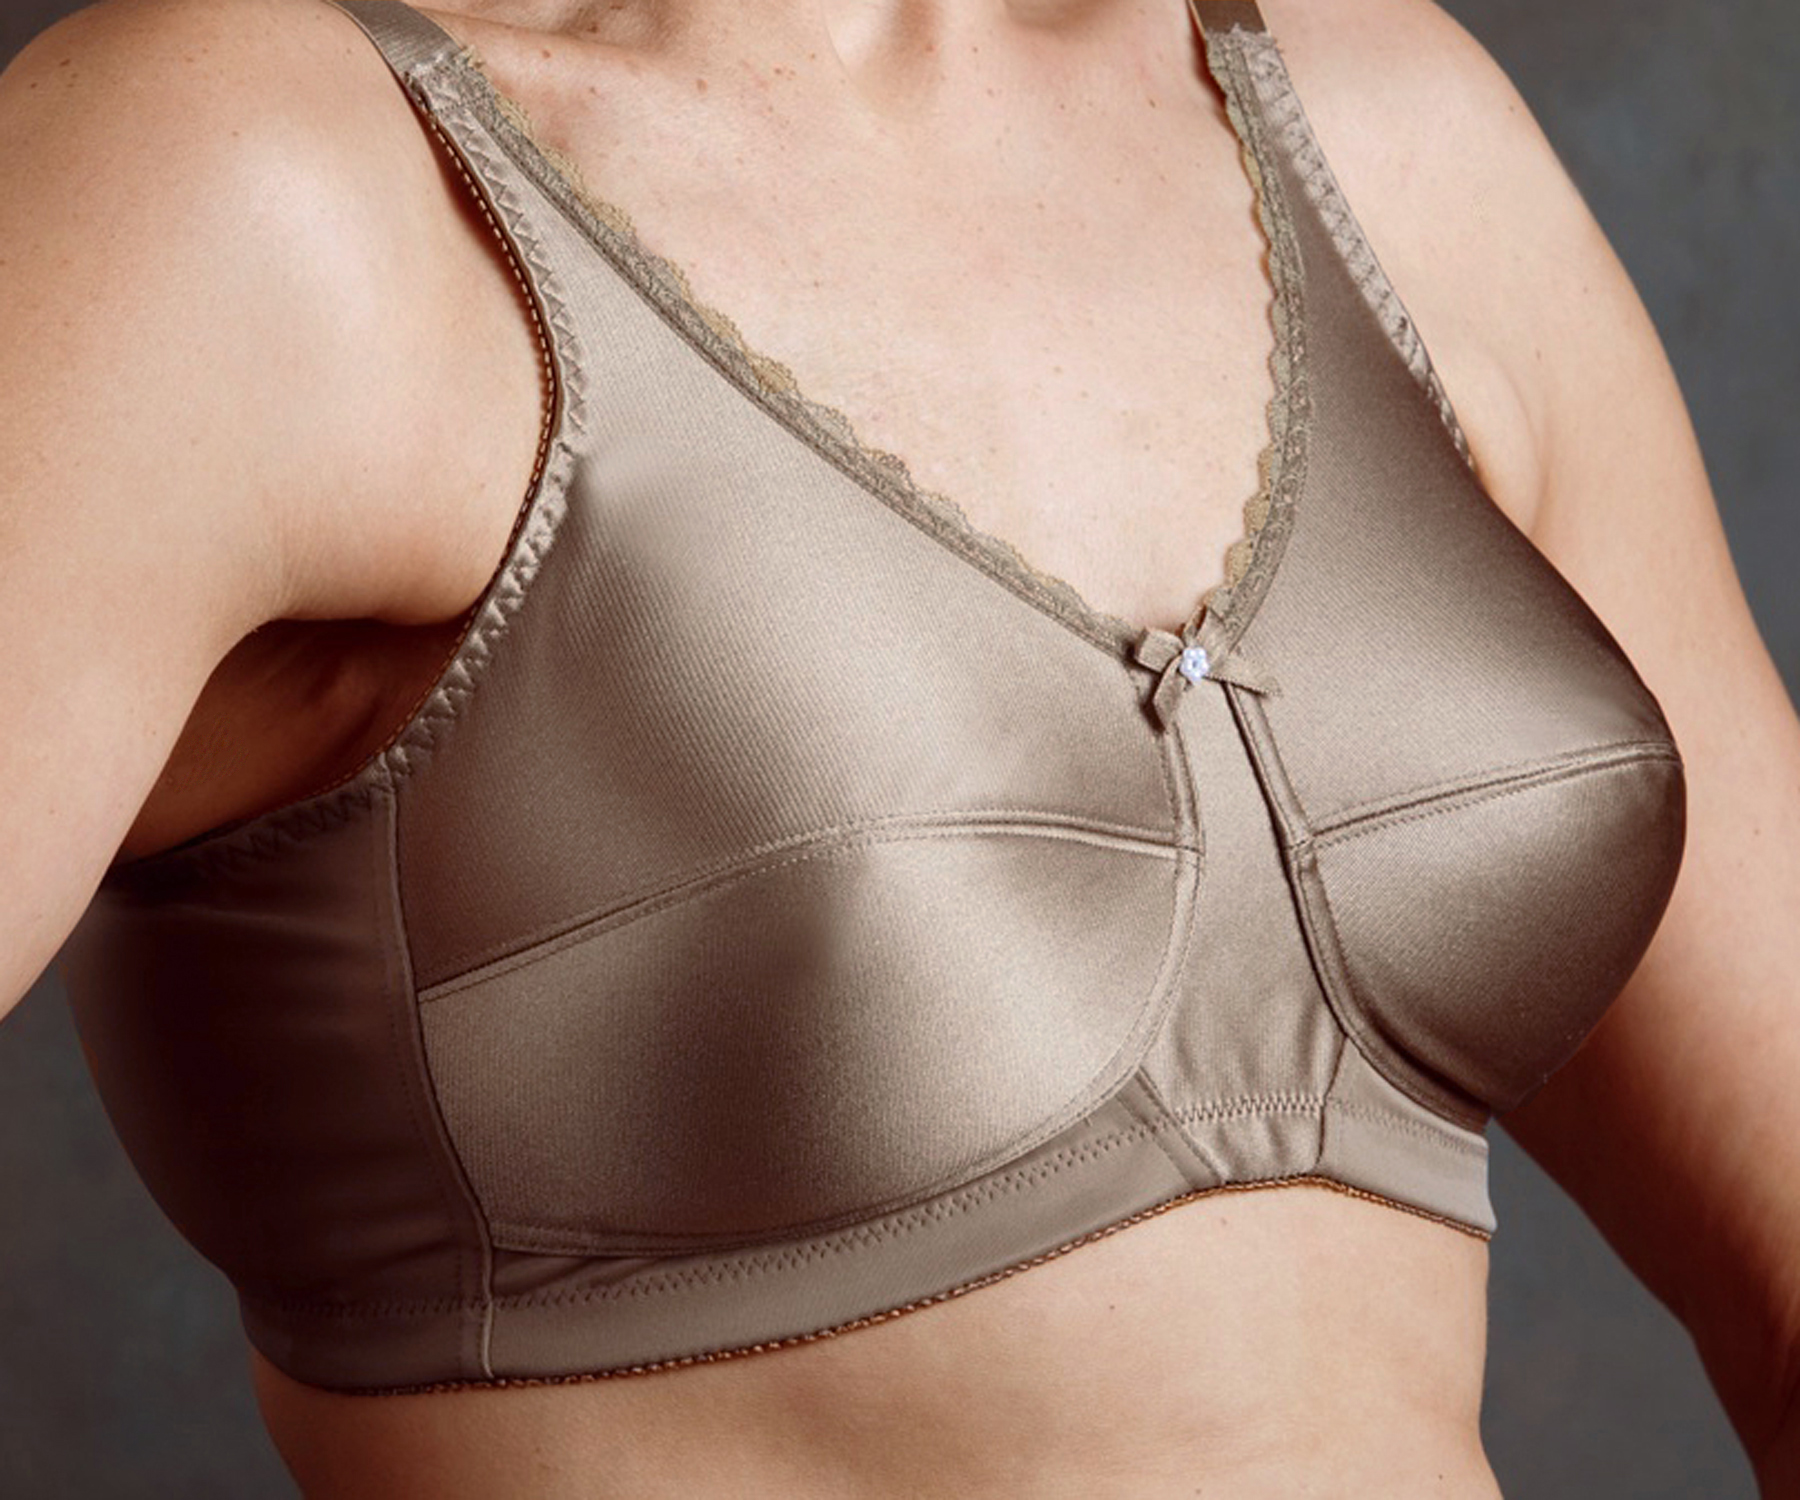 Nearly Me Mastectomy Plain Soft Cup Bra - Larger Sizes!